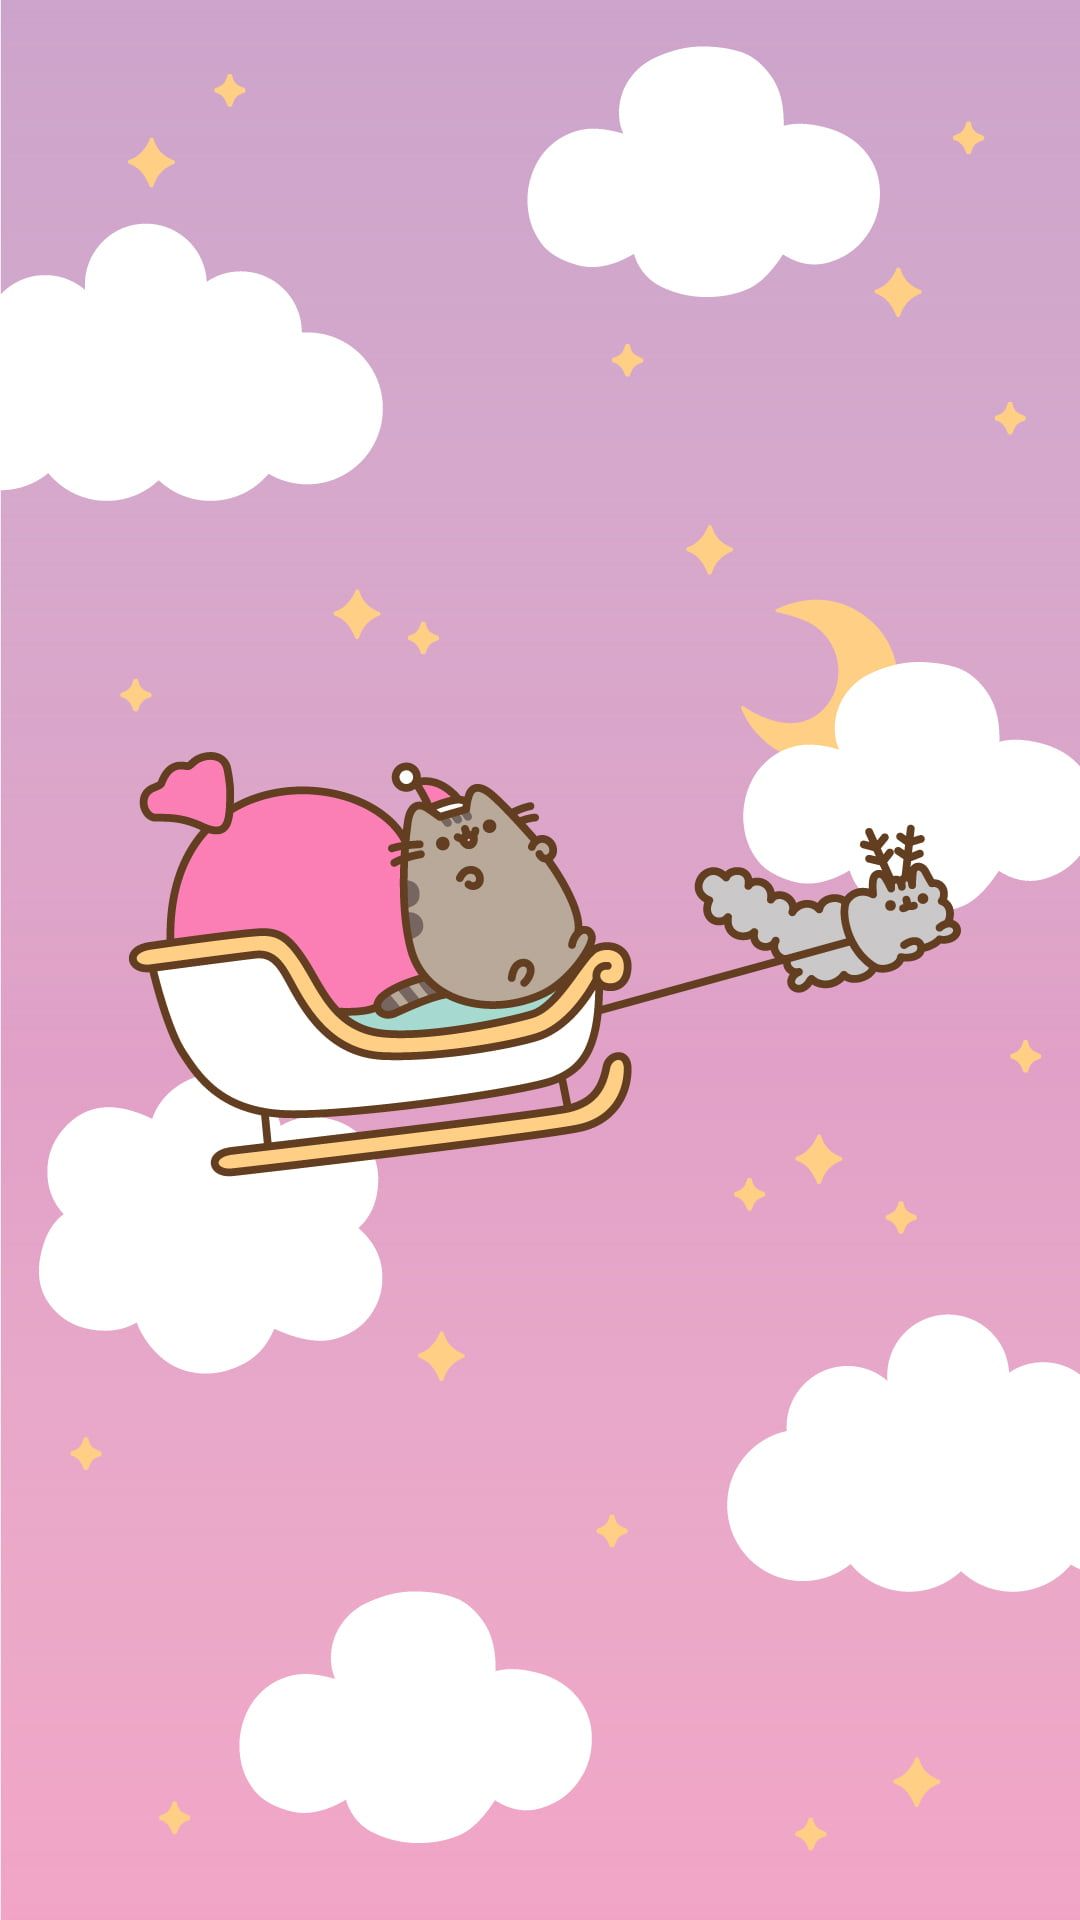 A cat riding in the sky on top of clouds - Pusheen